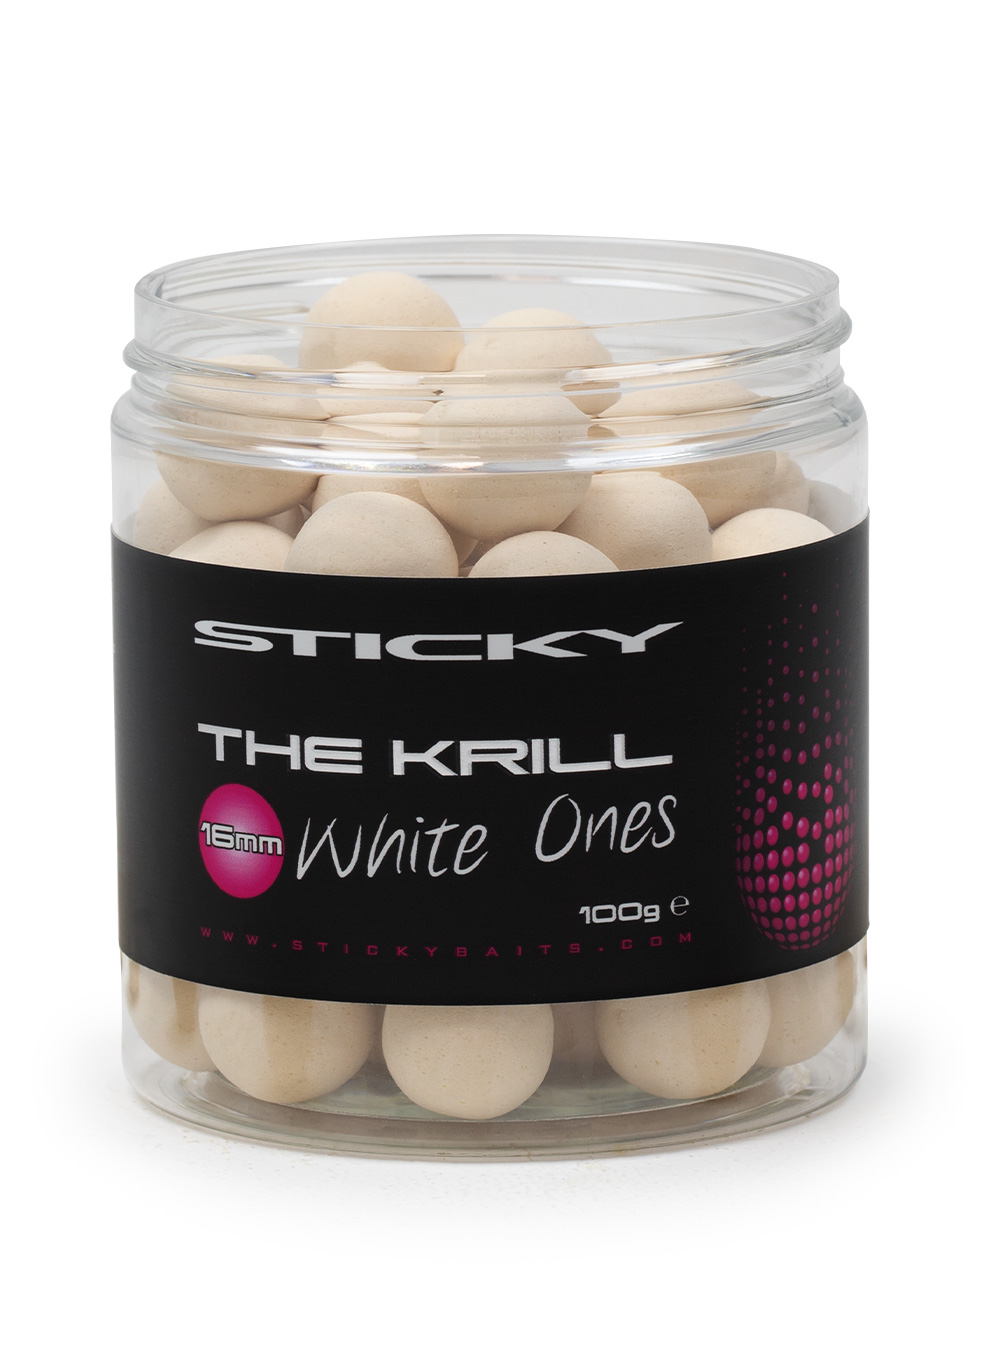 Dempsey grus Børnehave Sticky Baits - Products - The Krill White Ones - Carp Fishing Bait